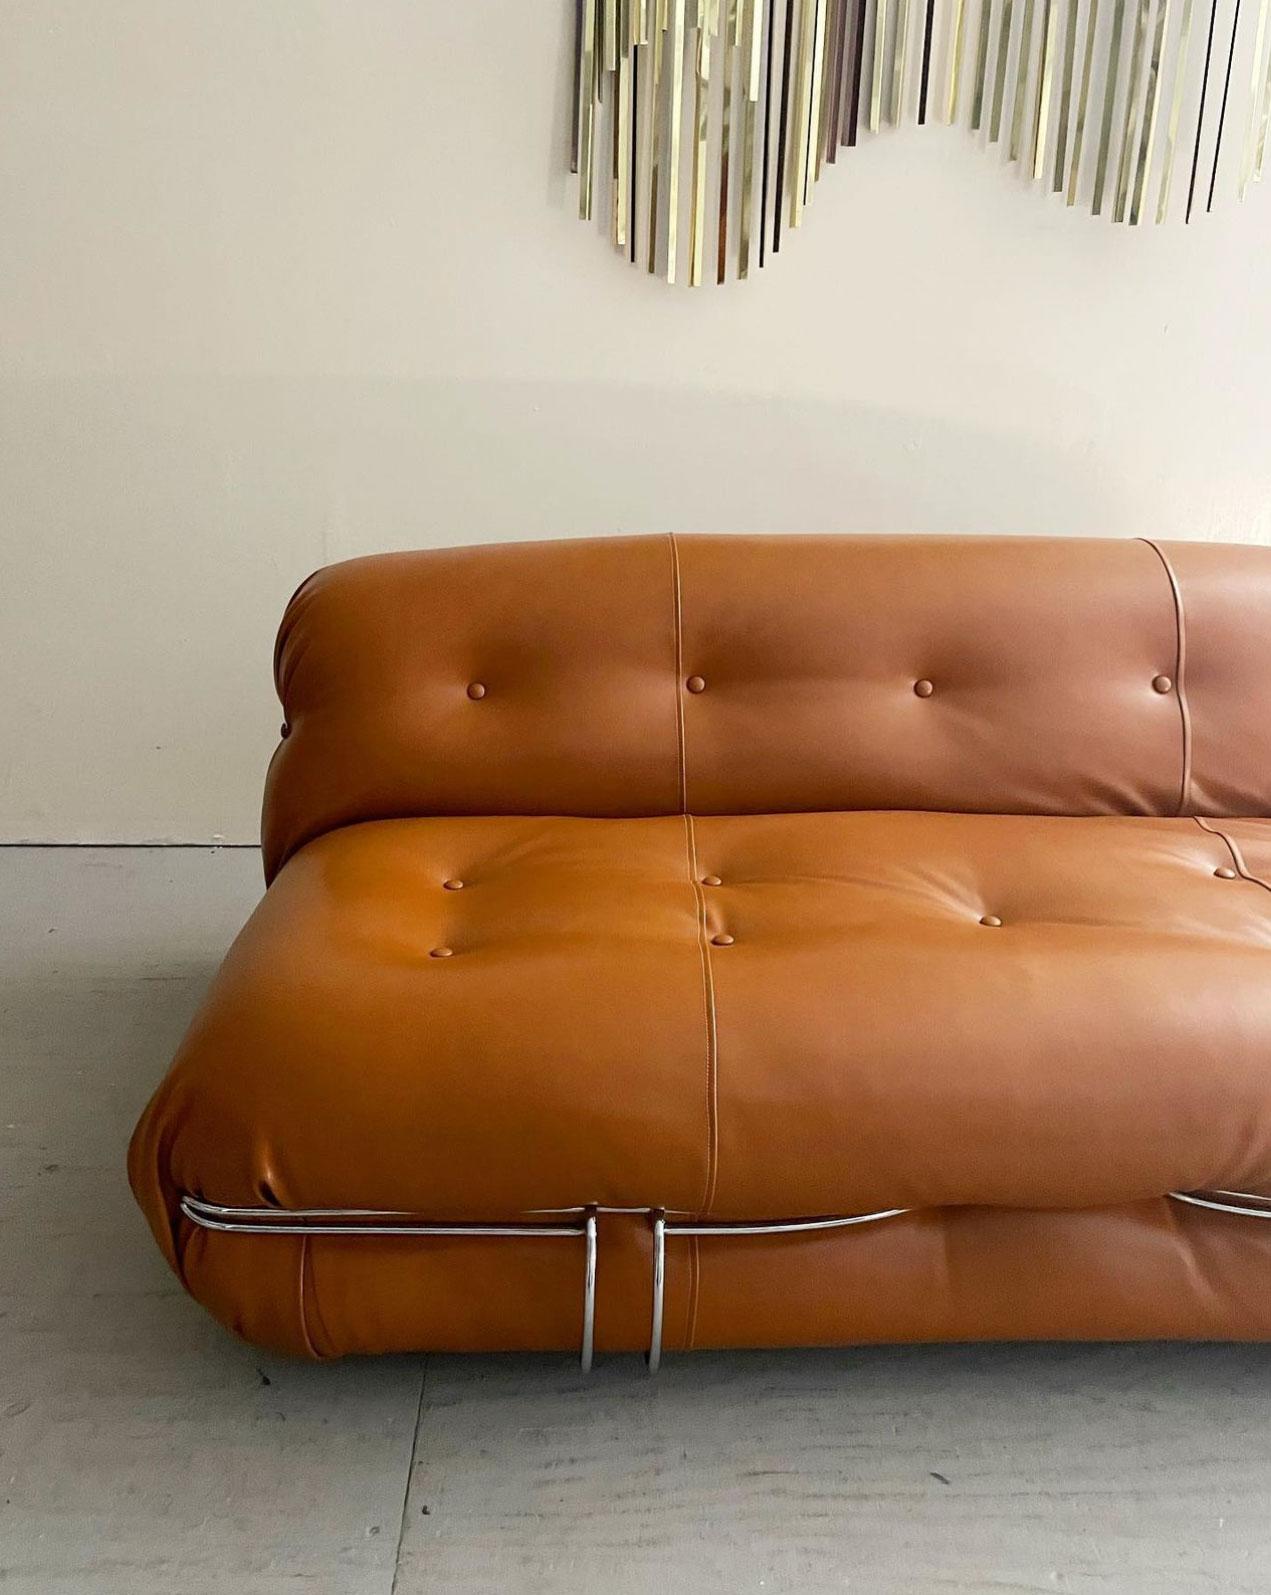 space age couch